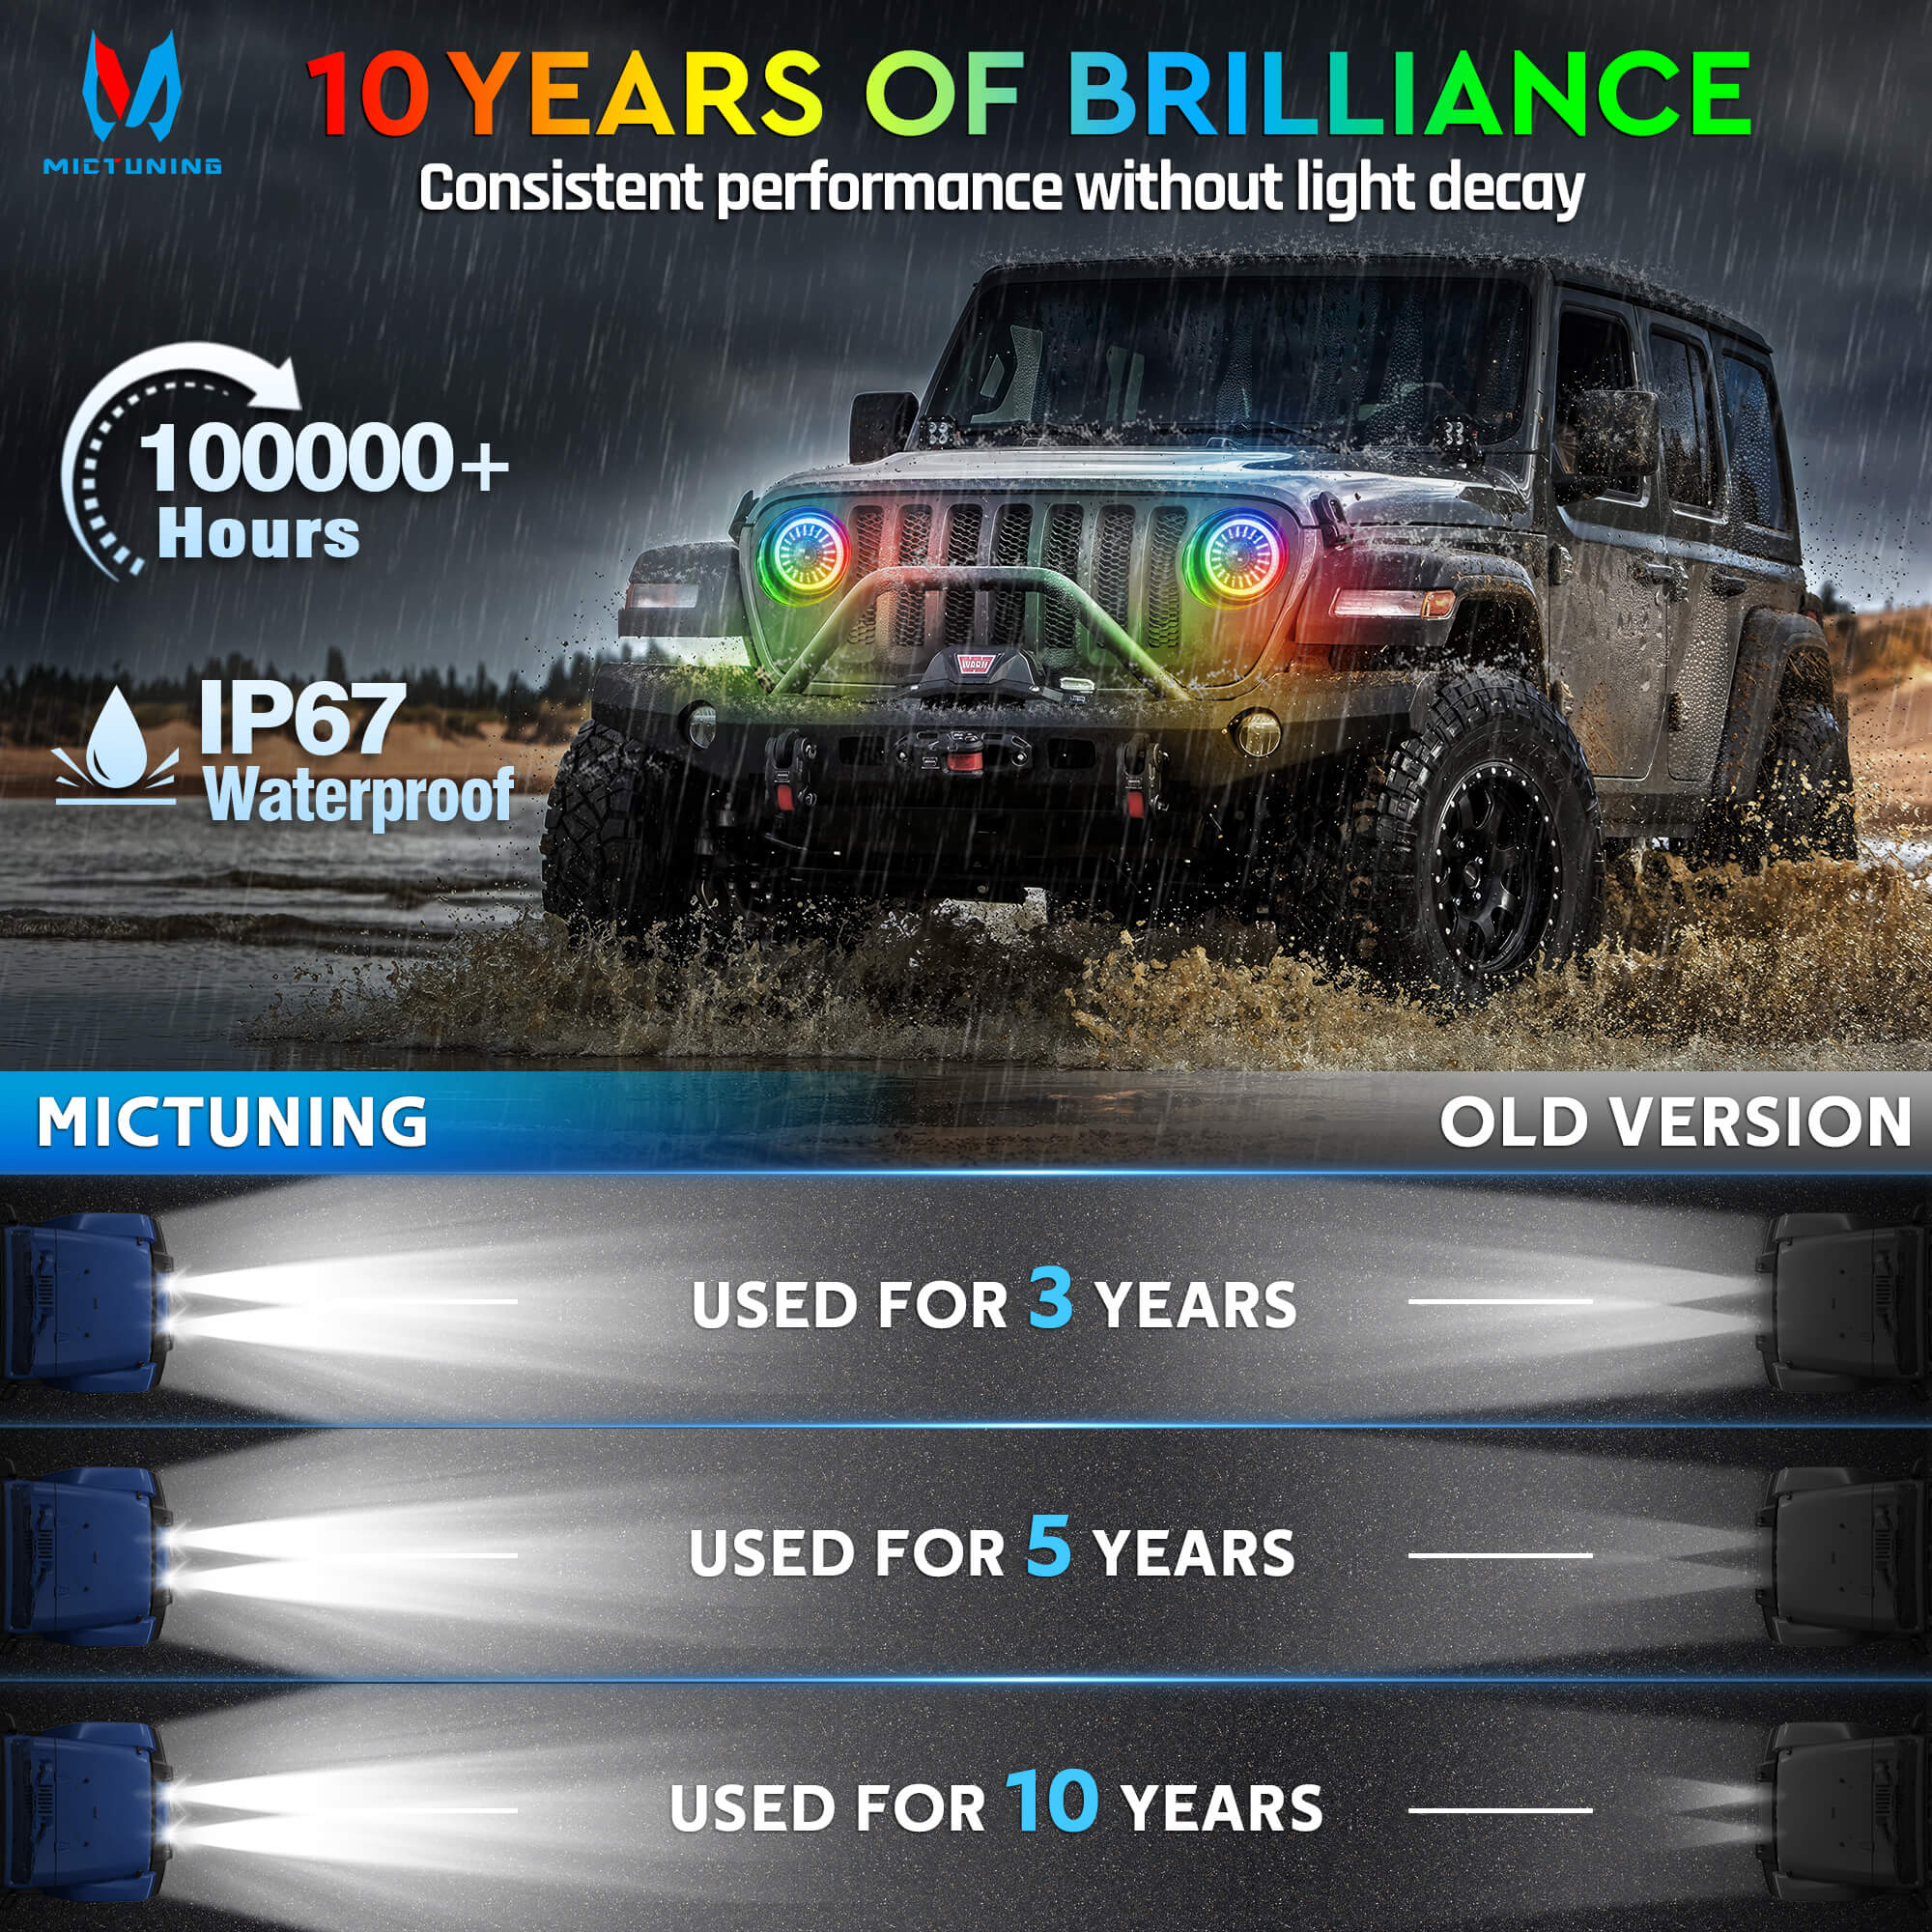 J1 RGB+IC 7″ Anti-glare LED Headlights, Multi-color Chasing, DOT Approved, For 1997-2018 Jeep Wrangler TJ JK Chevy Ford GMC